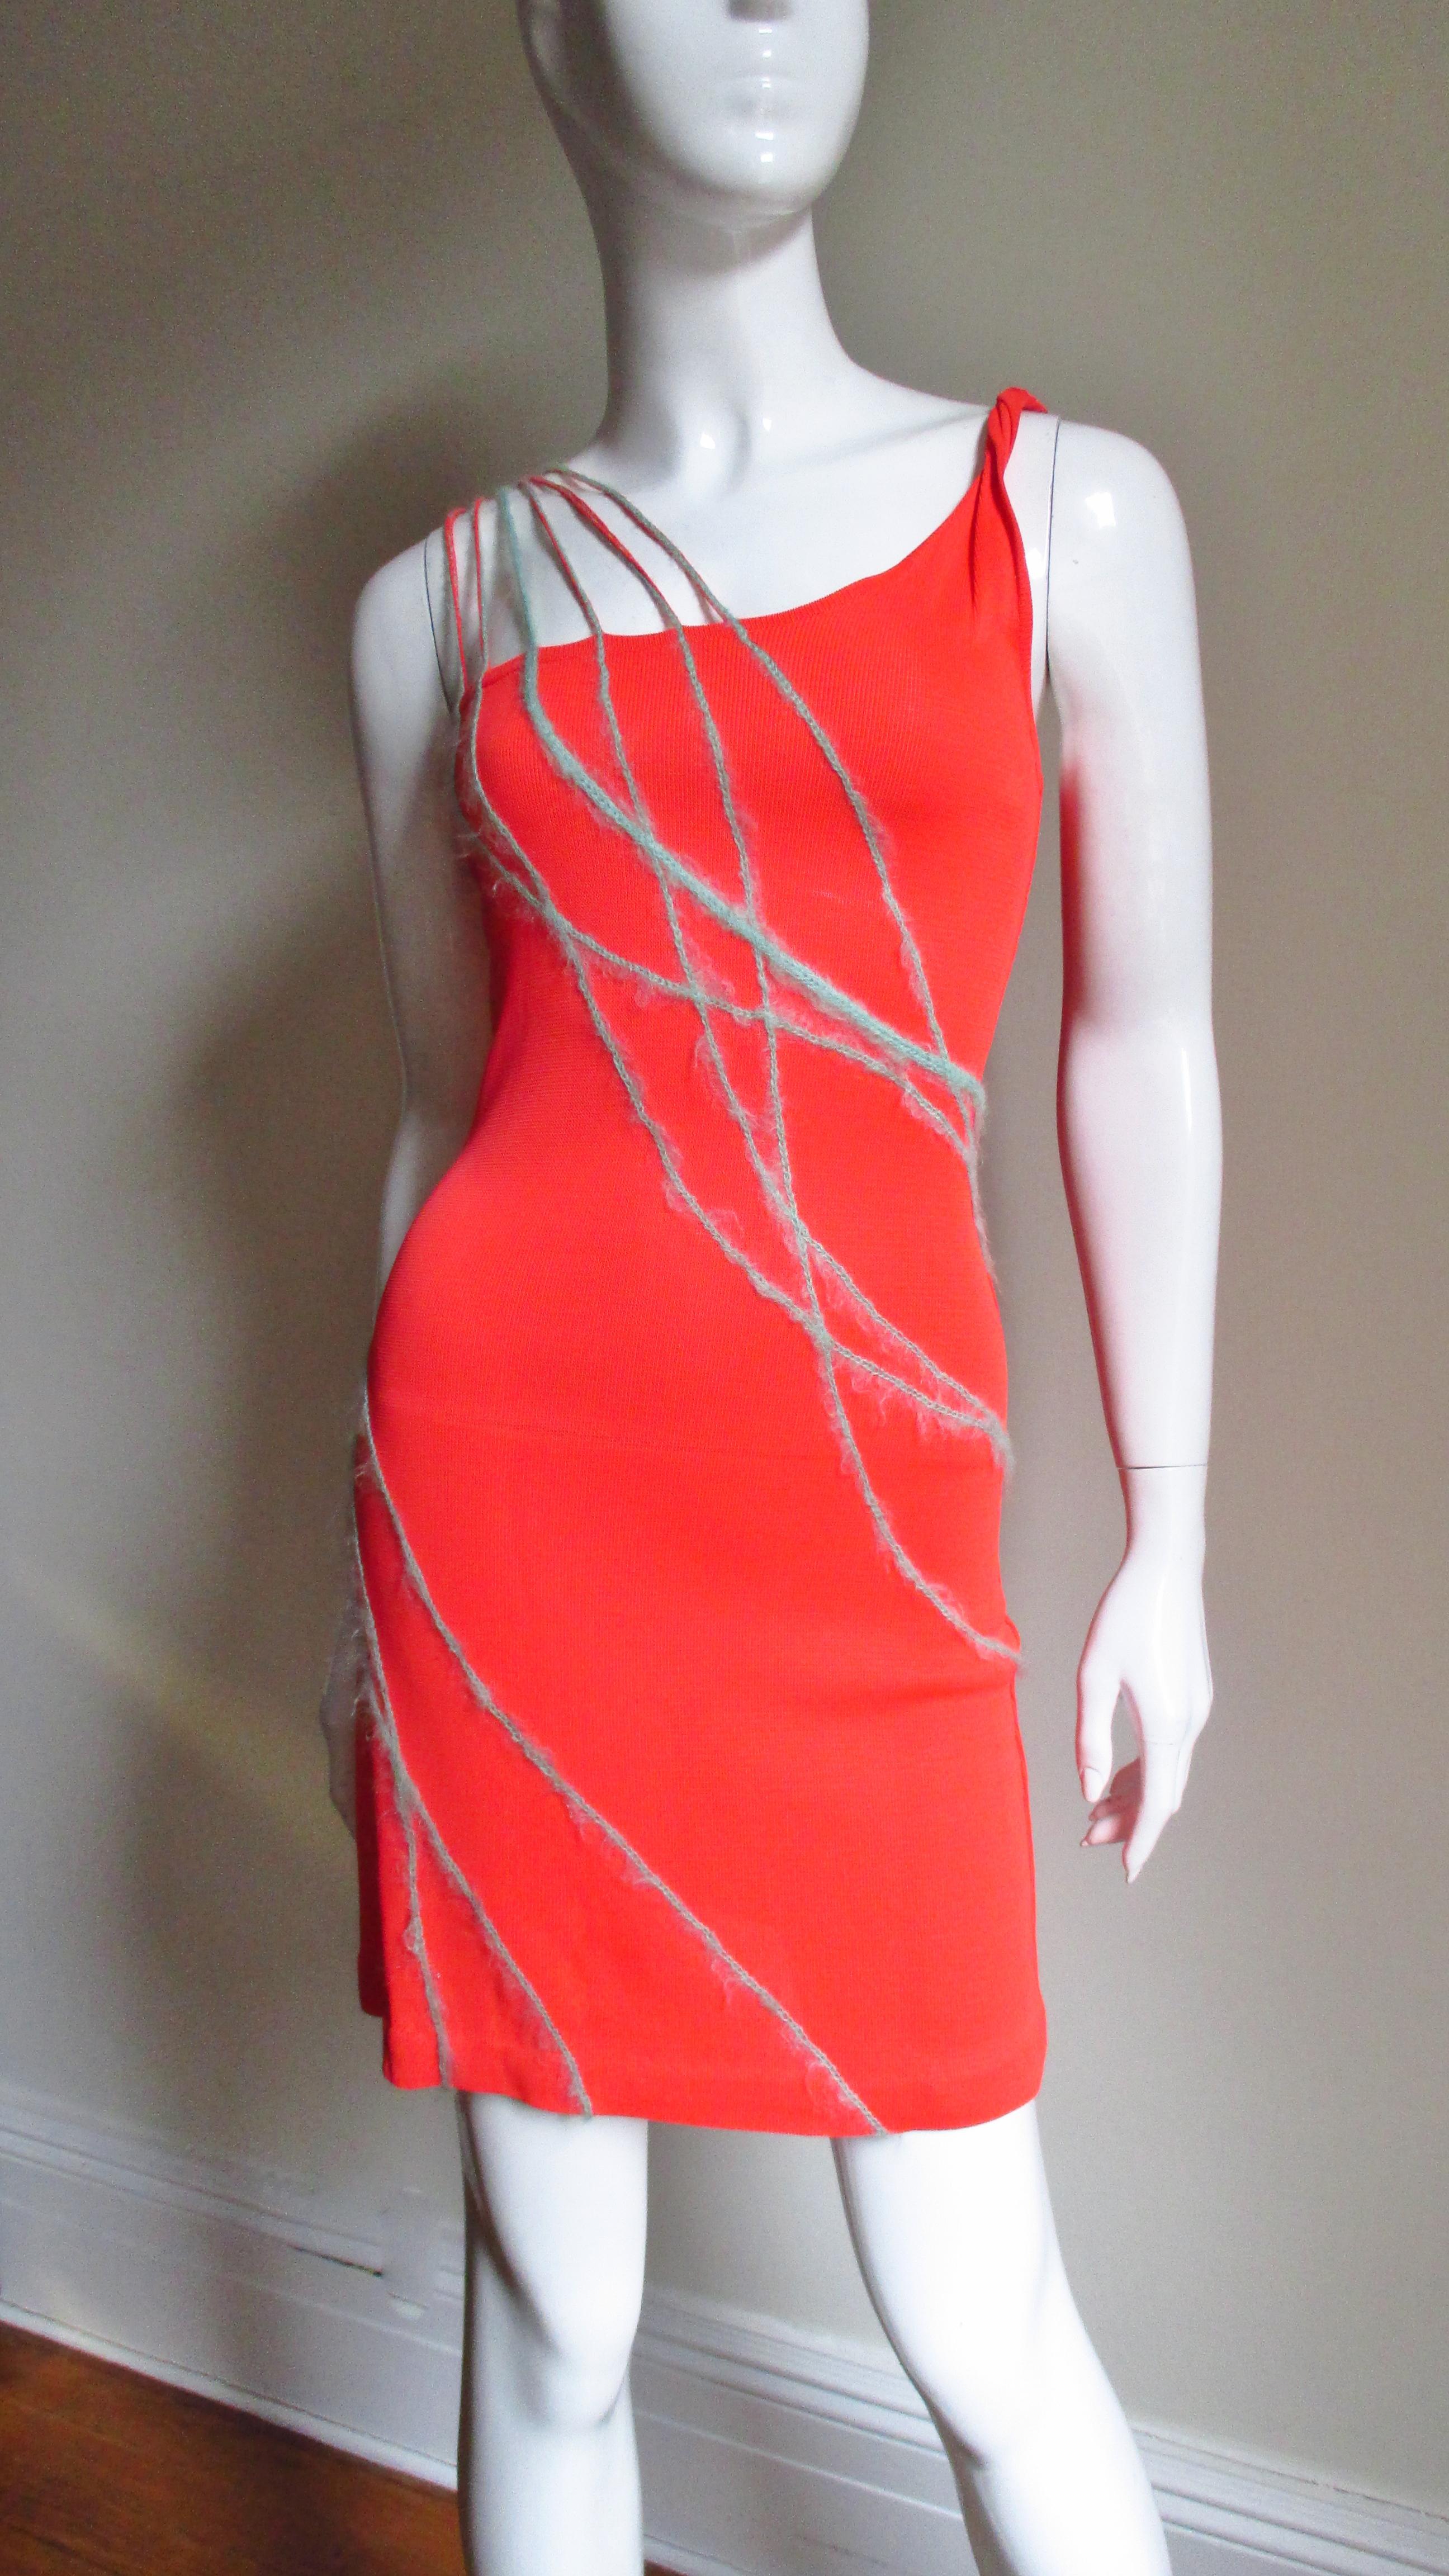 Gianni Versace One Shoulder Dress 1990s In Good Condition For Sale In Water Mill, NY